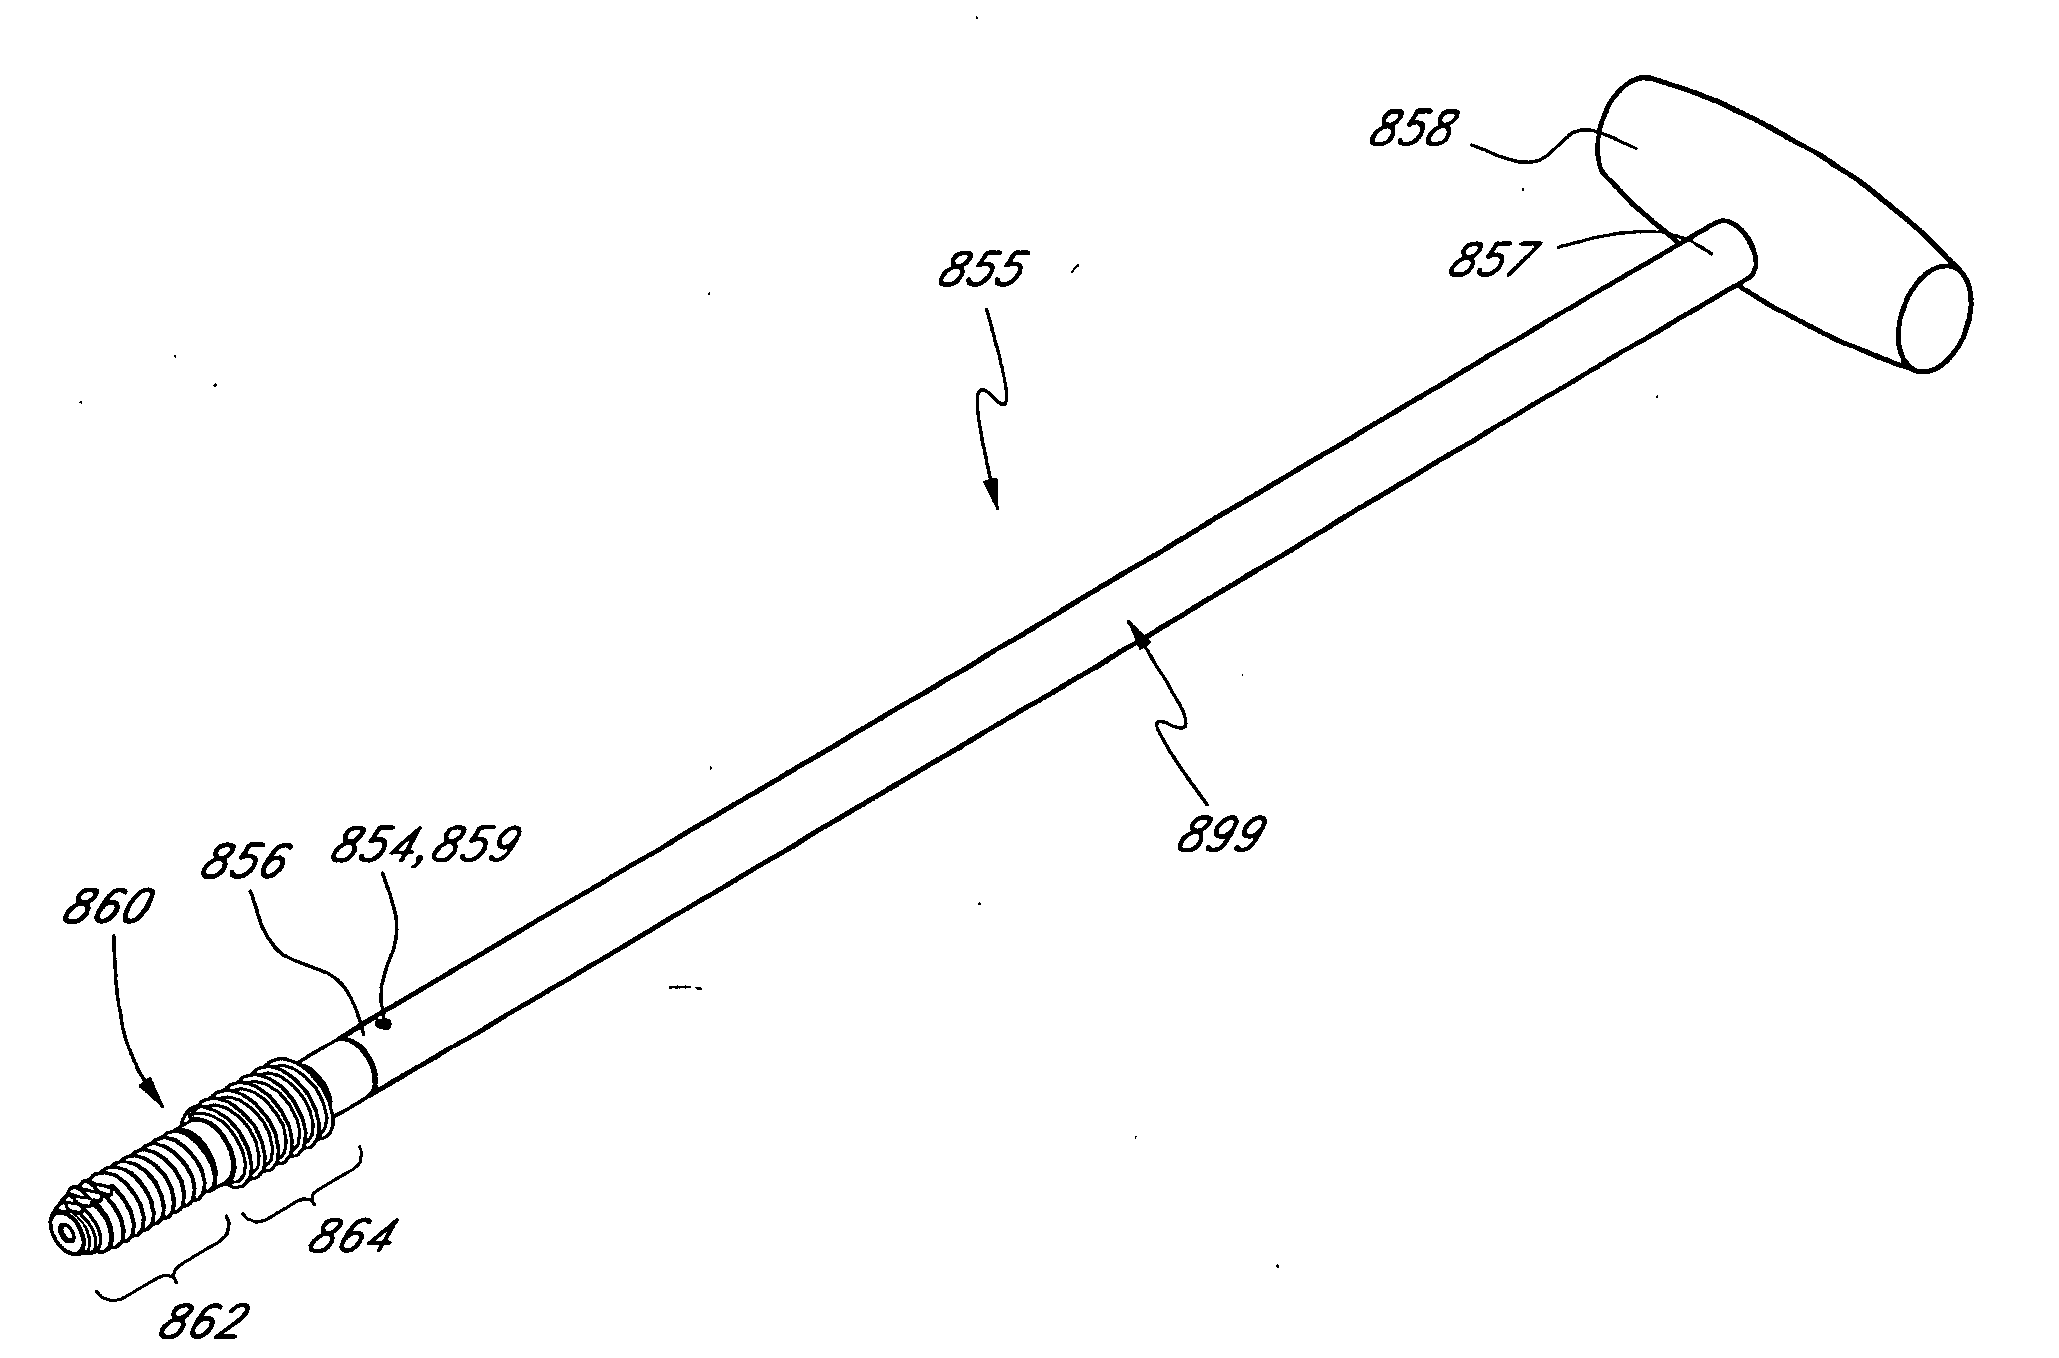 Method and apparatus for spinal distraction